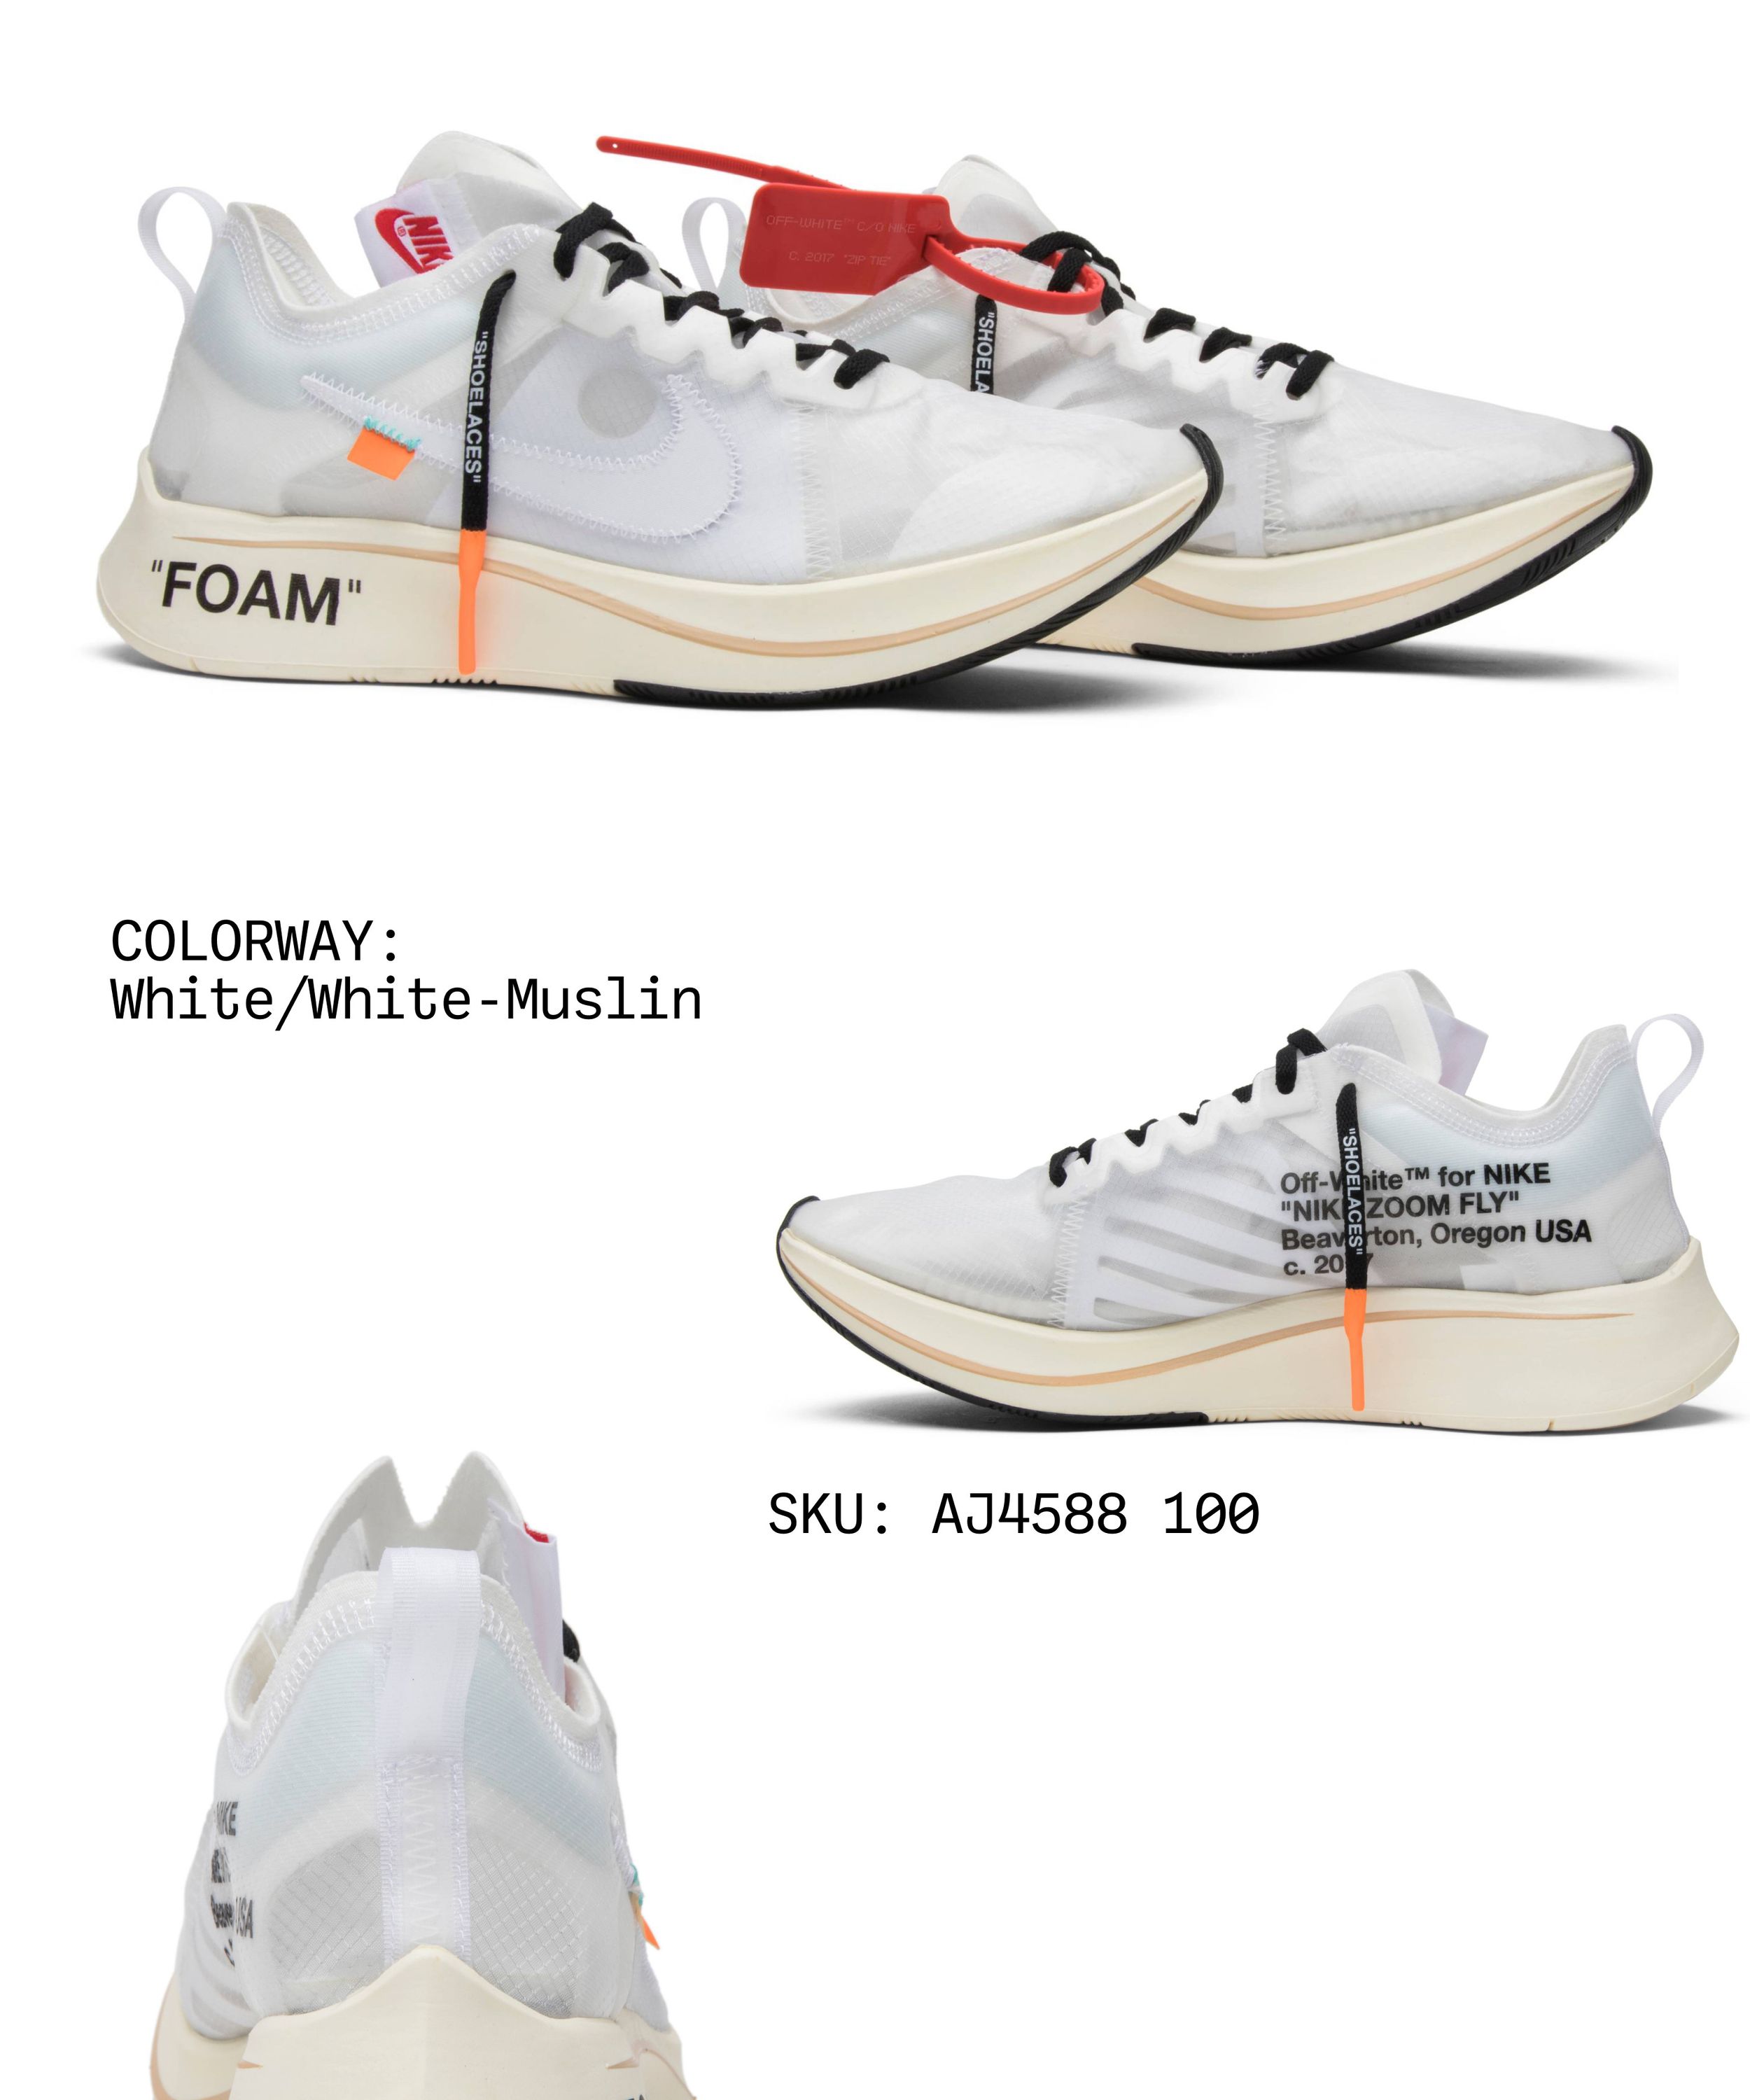 Off-White x Nike: a new collaboration is coming